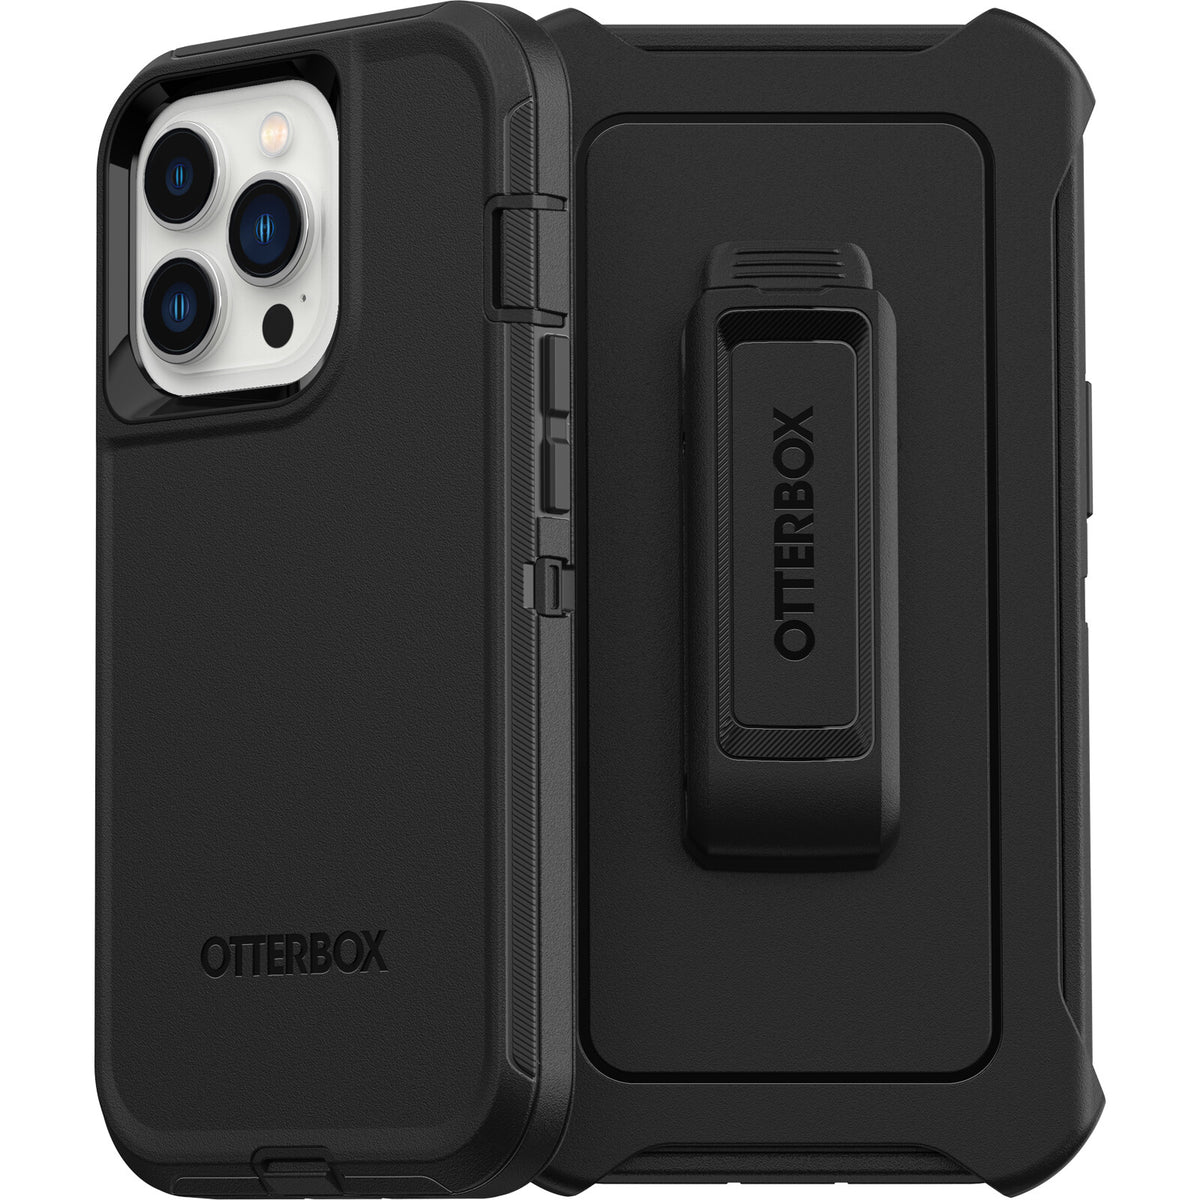 OtterBox Defender Case for iPhone 13 Pro in Black - No Packaging